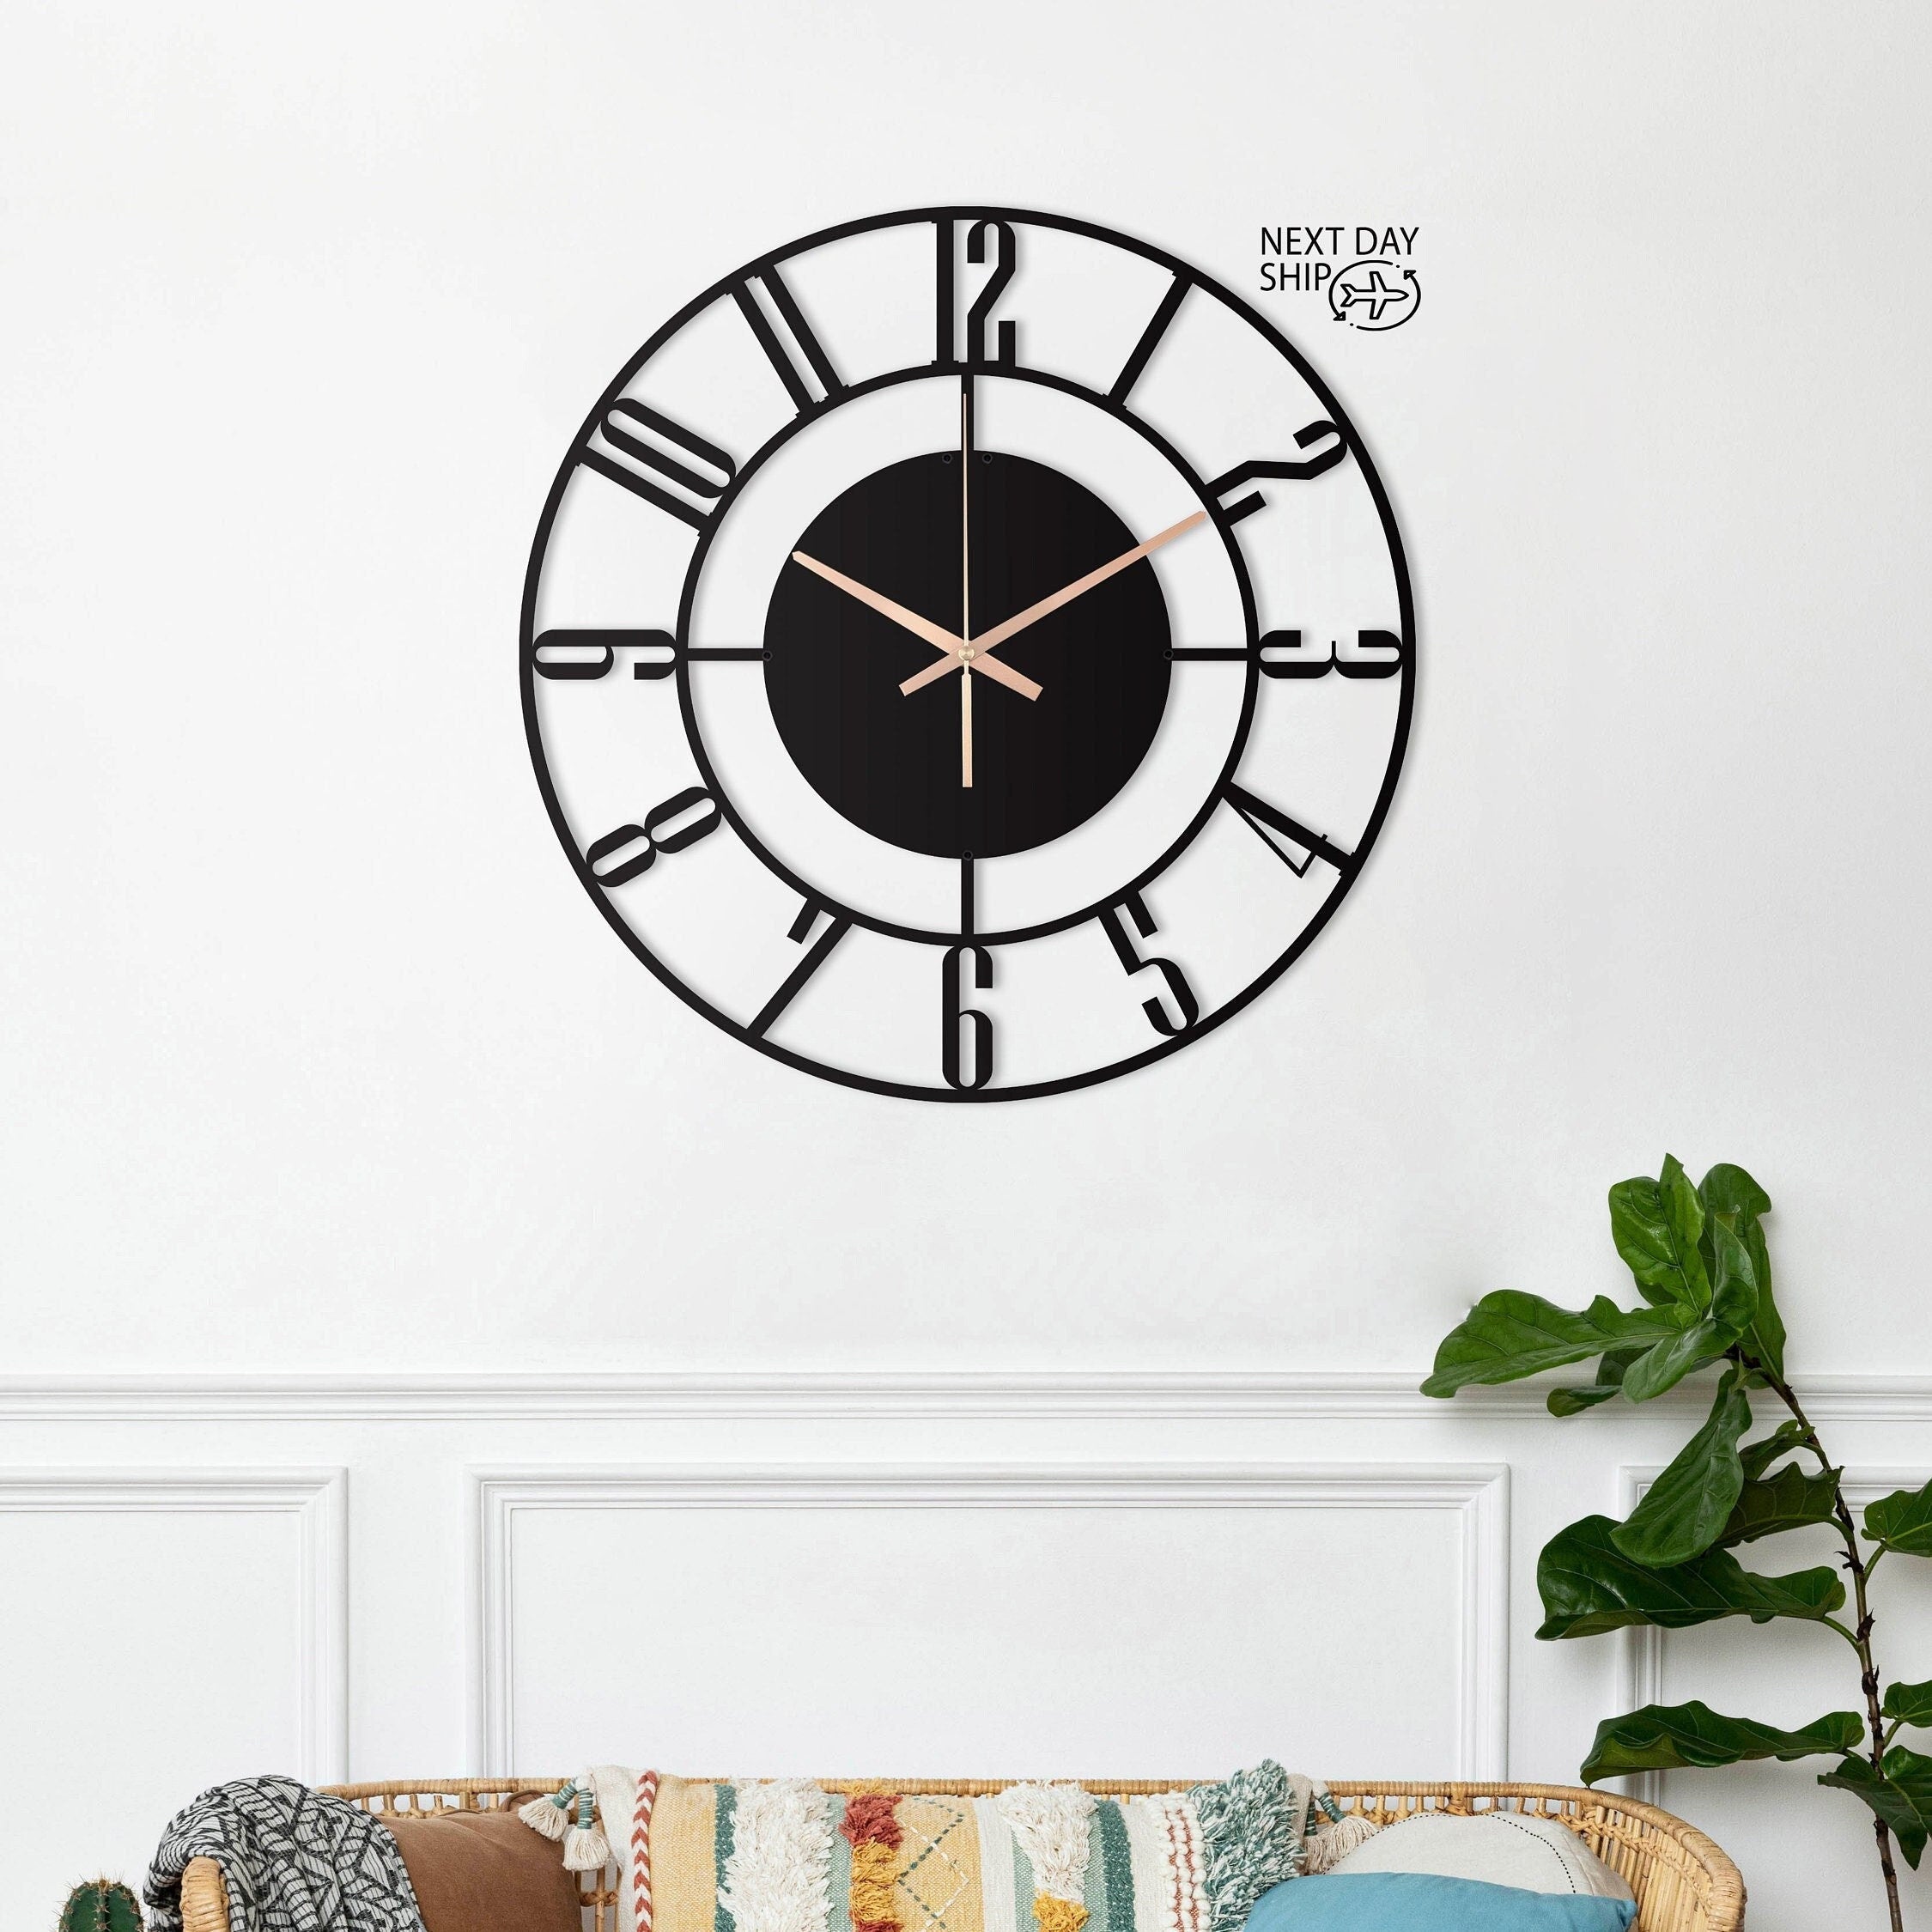 Metal Mantel Clock, Wall Clock, Large Metal Wall Clock, Black Wall Clock Modern Oversized Wall Clock With Numbers, Clocks For Wall